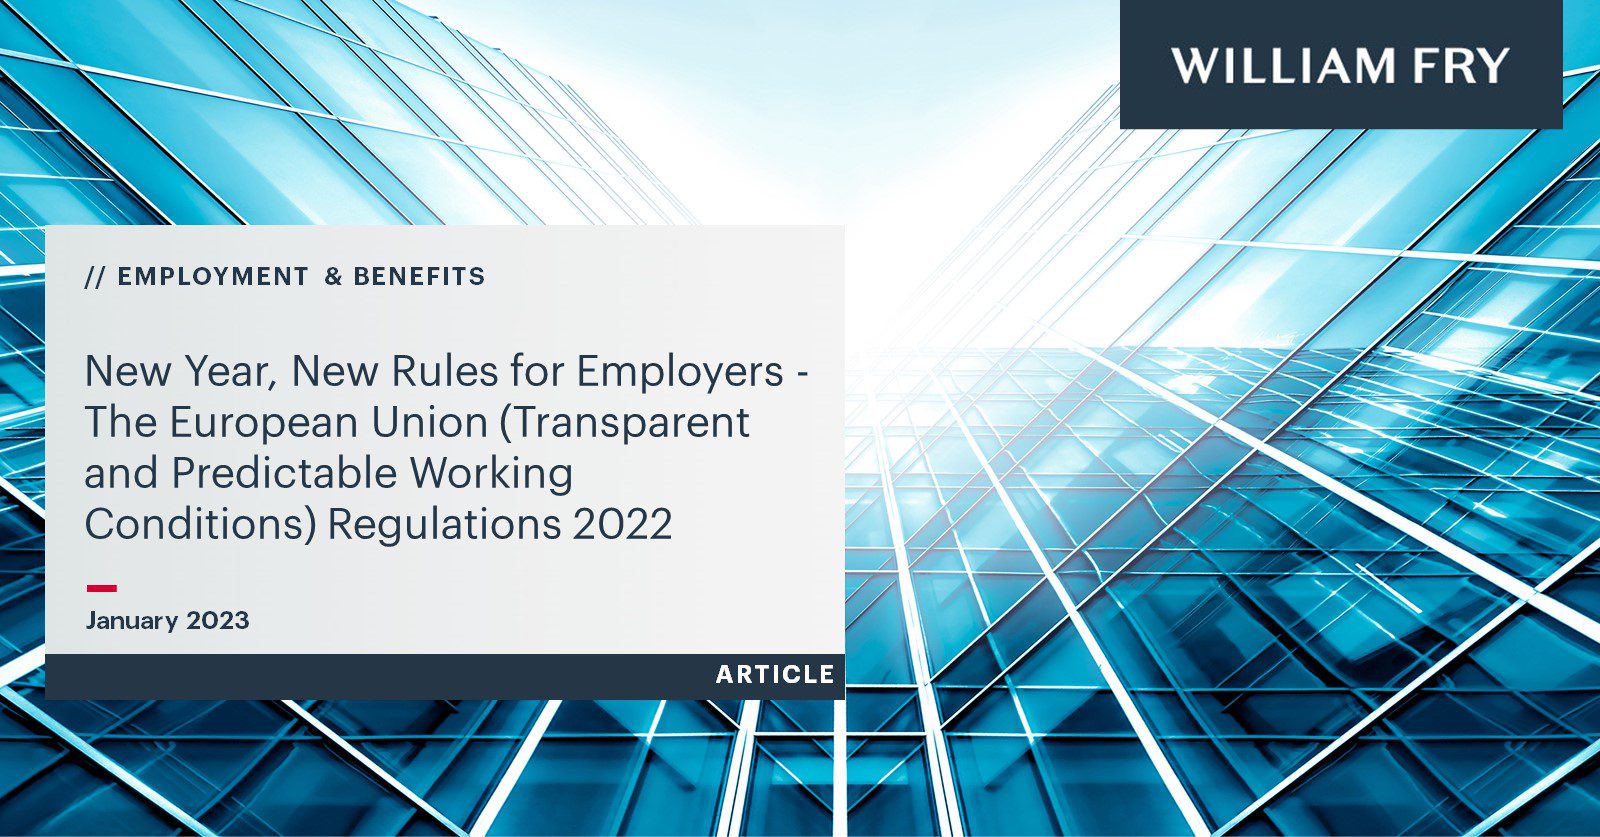 New Year New Rules for Employers - The European Union Regulations 2022